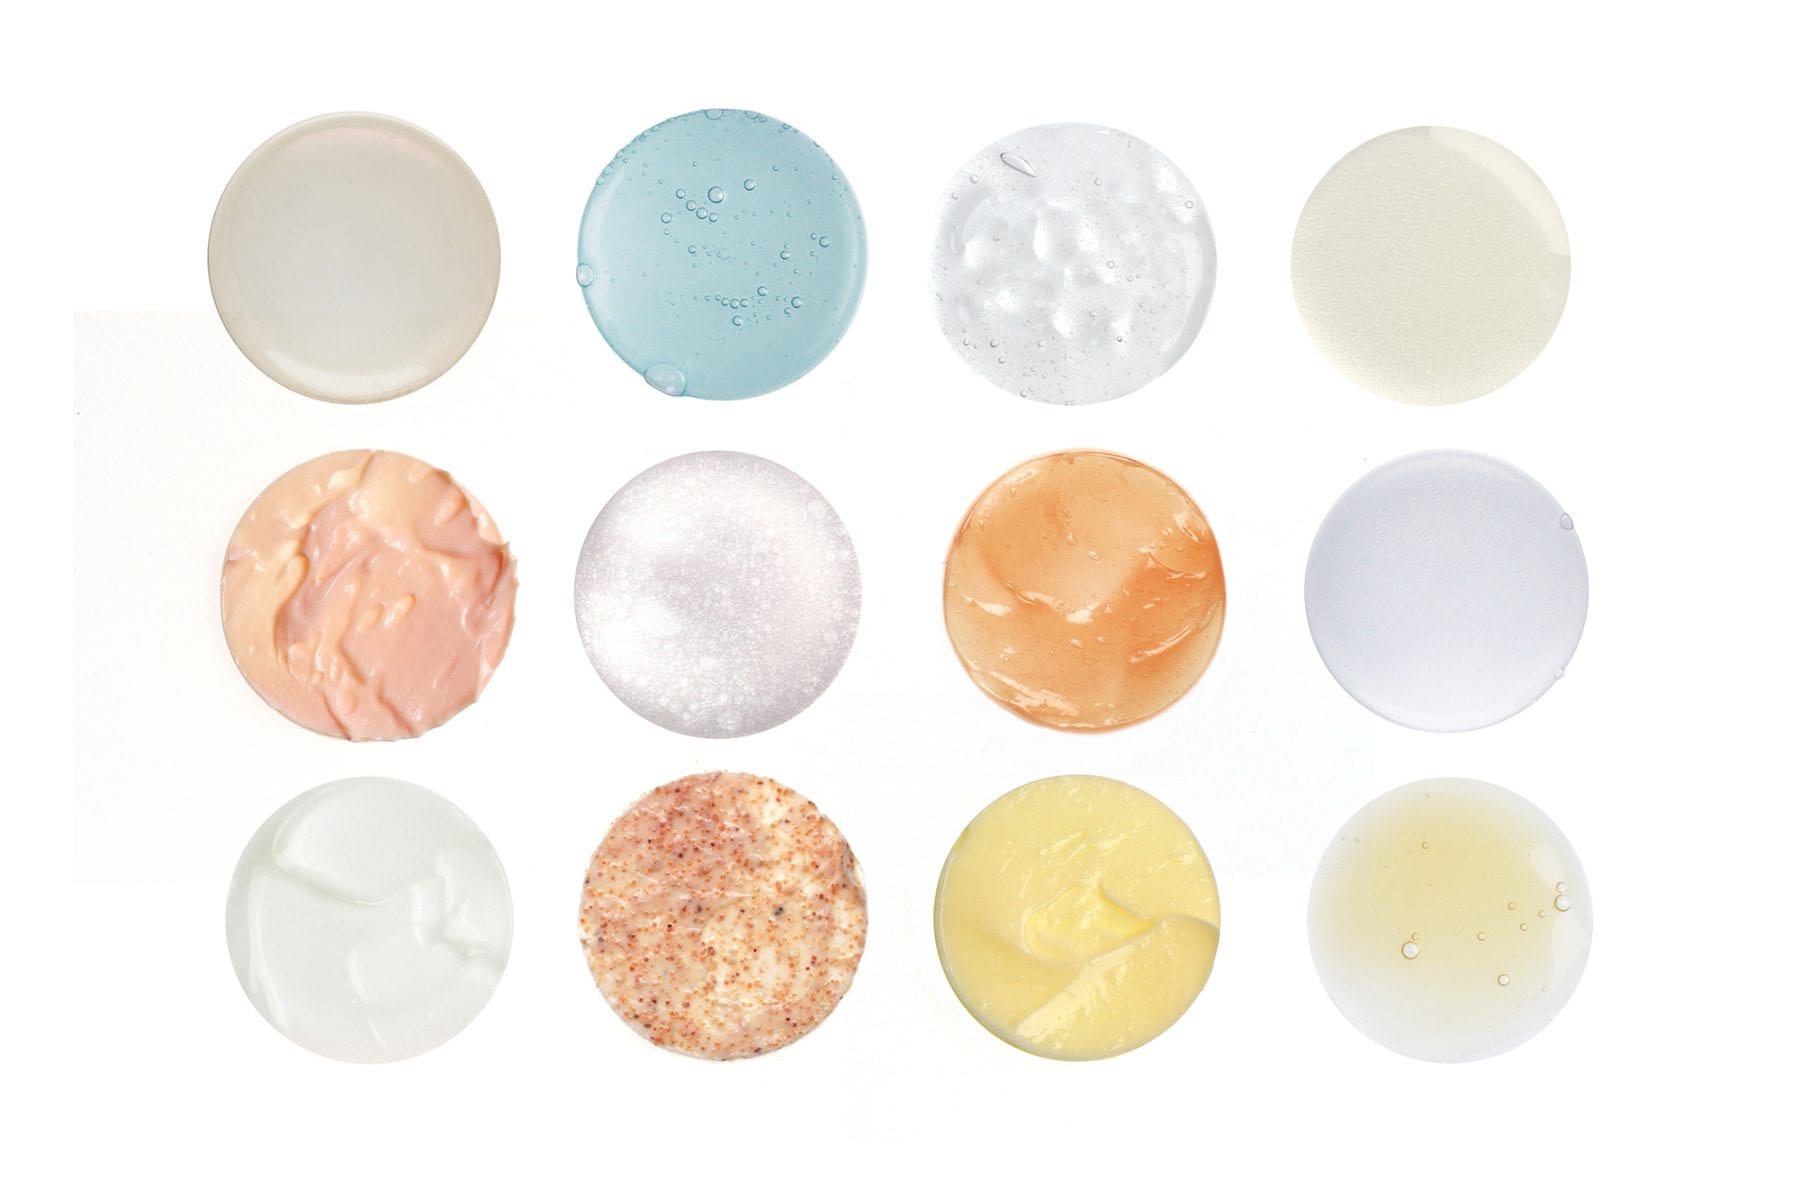 Balms, Jelly, Lotions, Gels: Your Guide To Skincare Textures